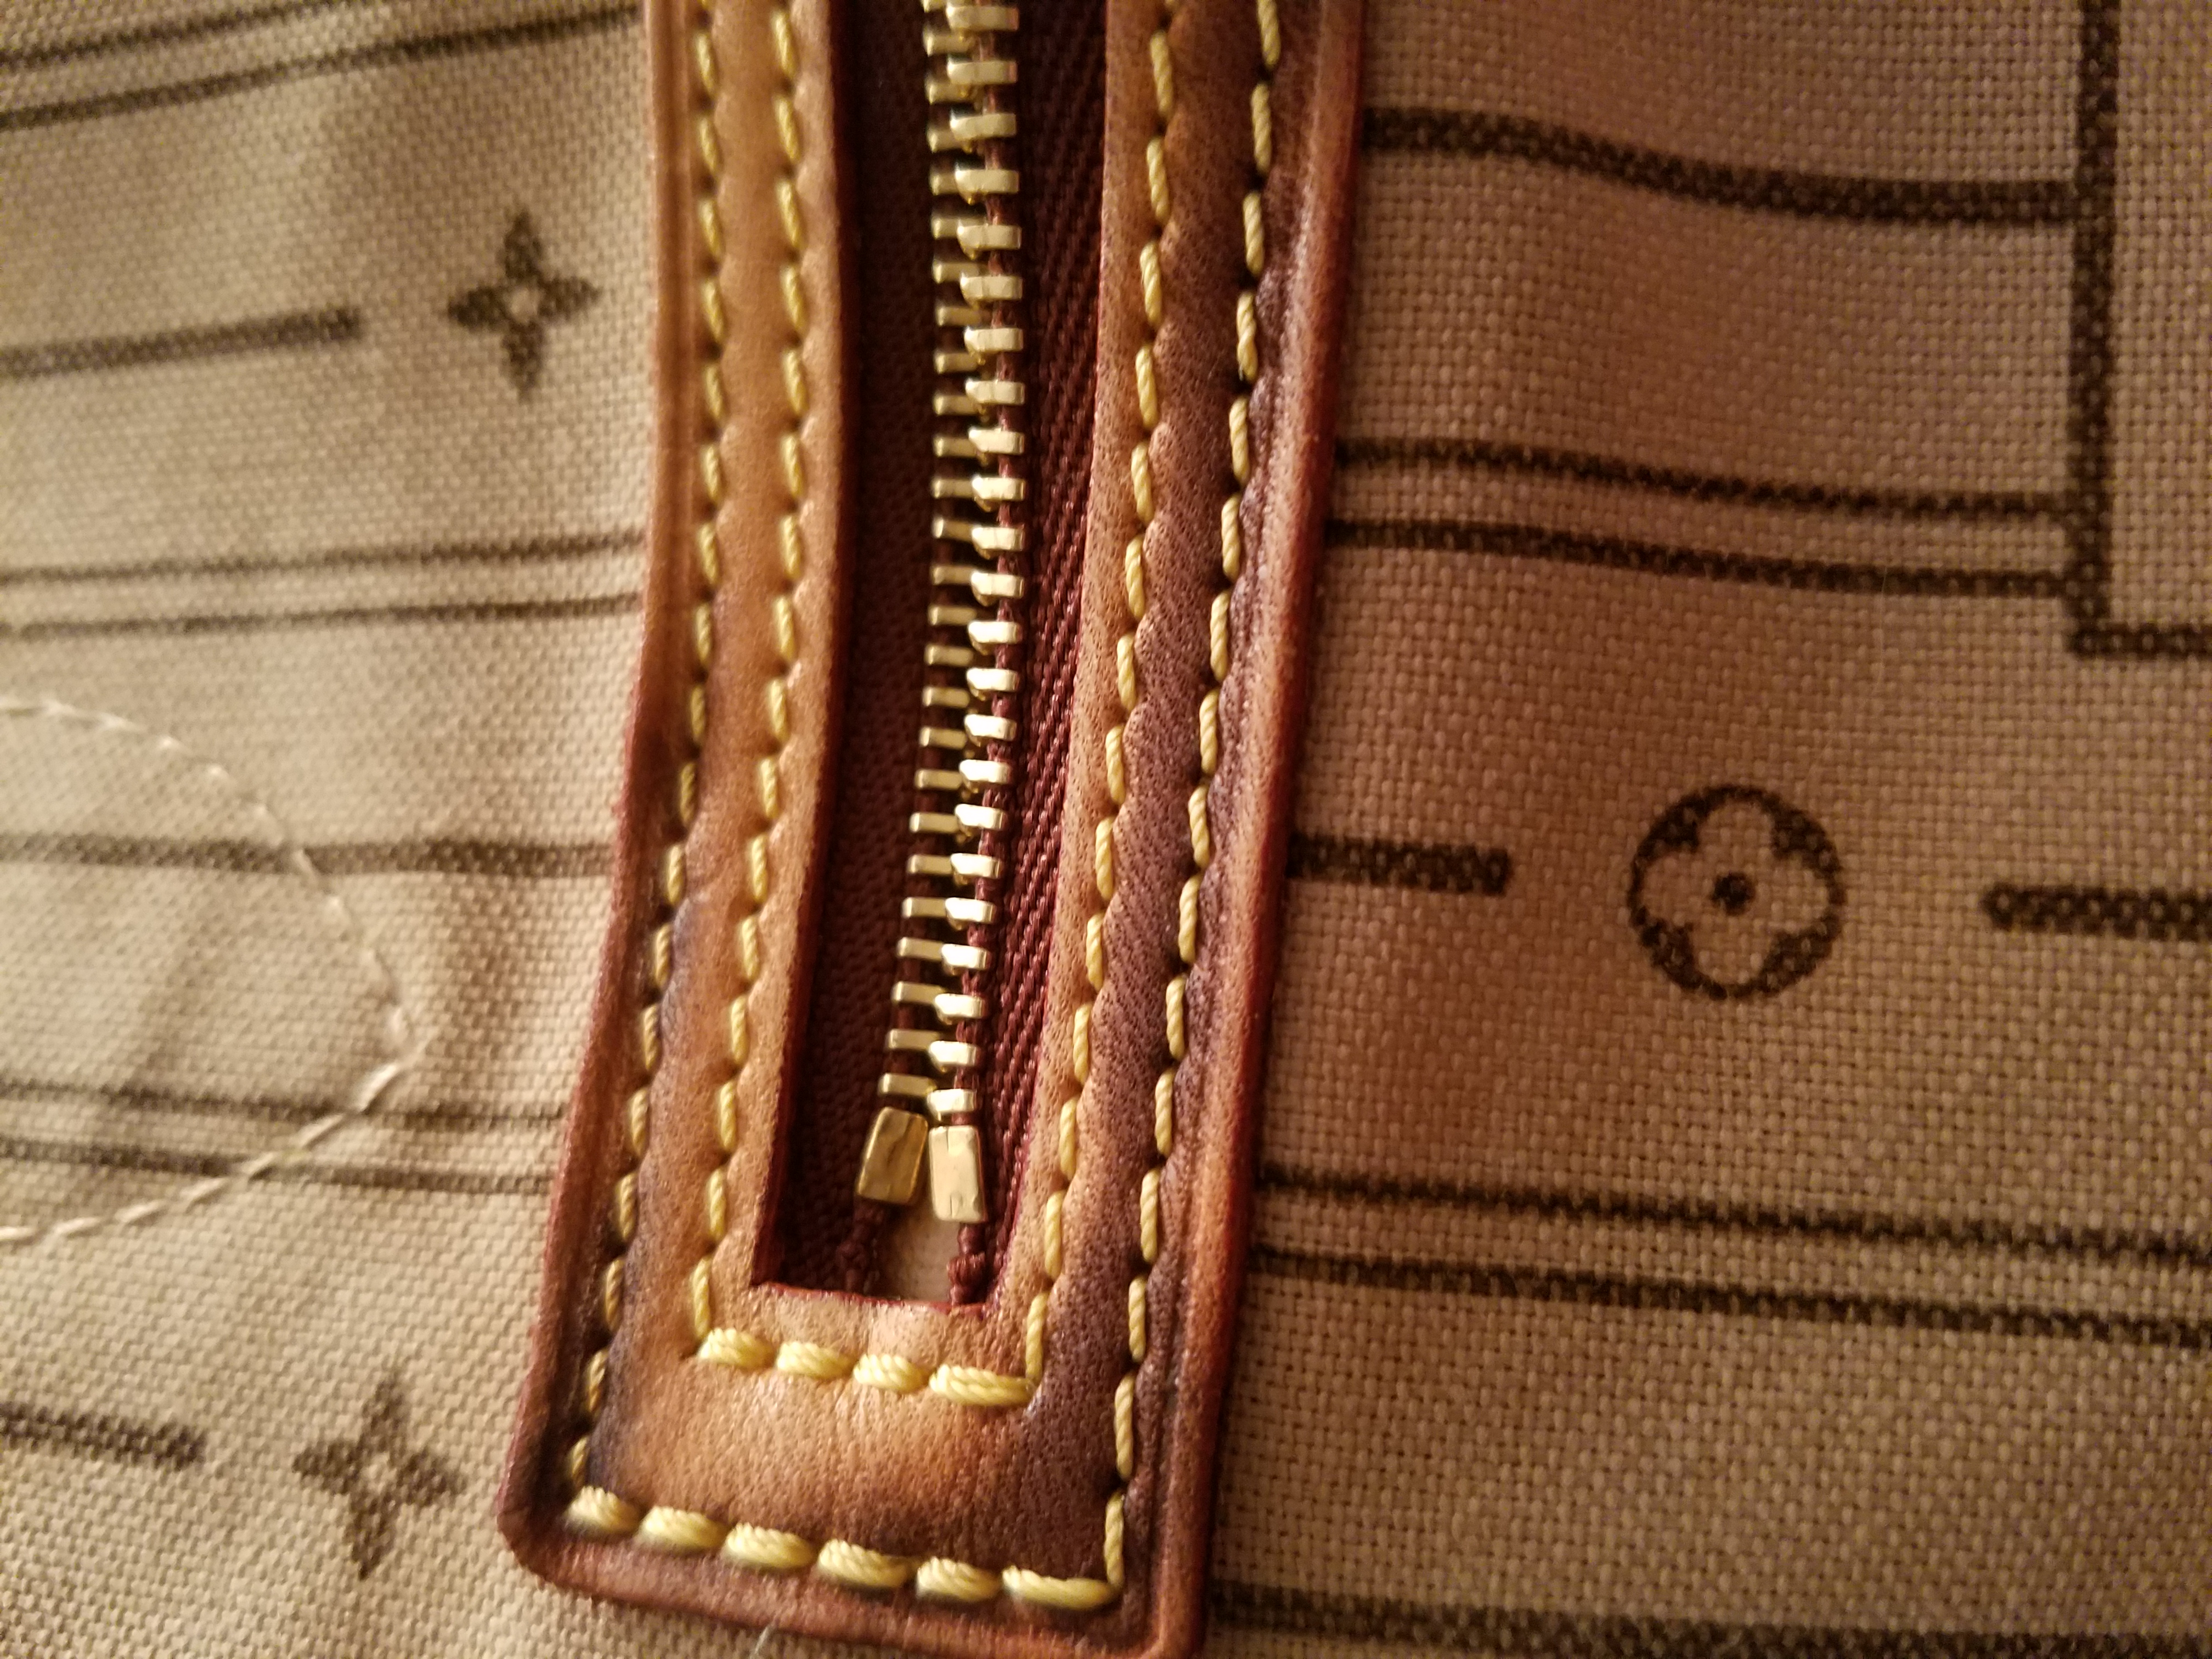 Inside pocket of neverfull ruined by wet towel with vinegar